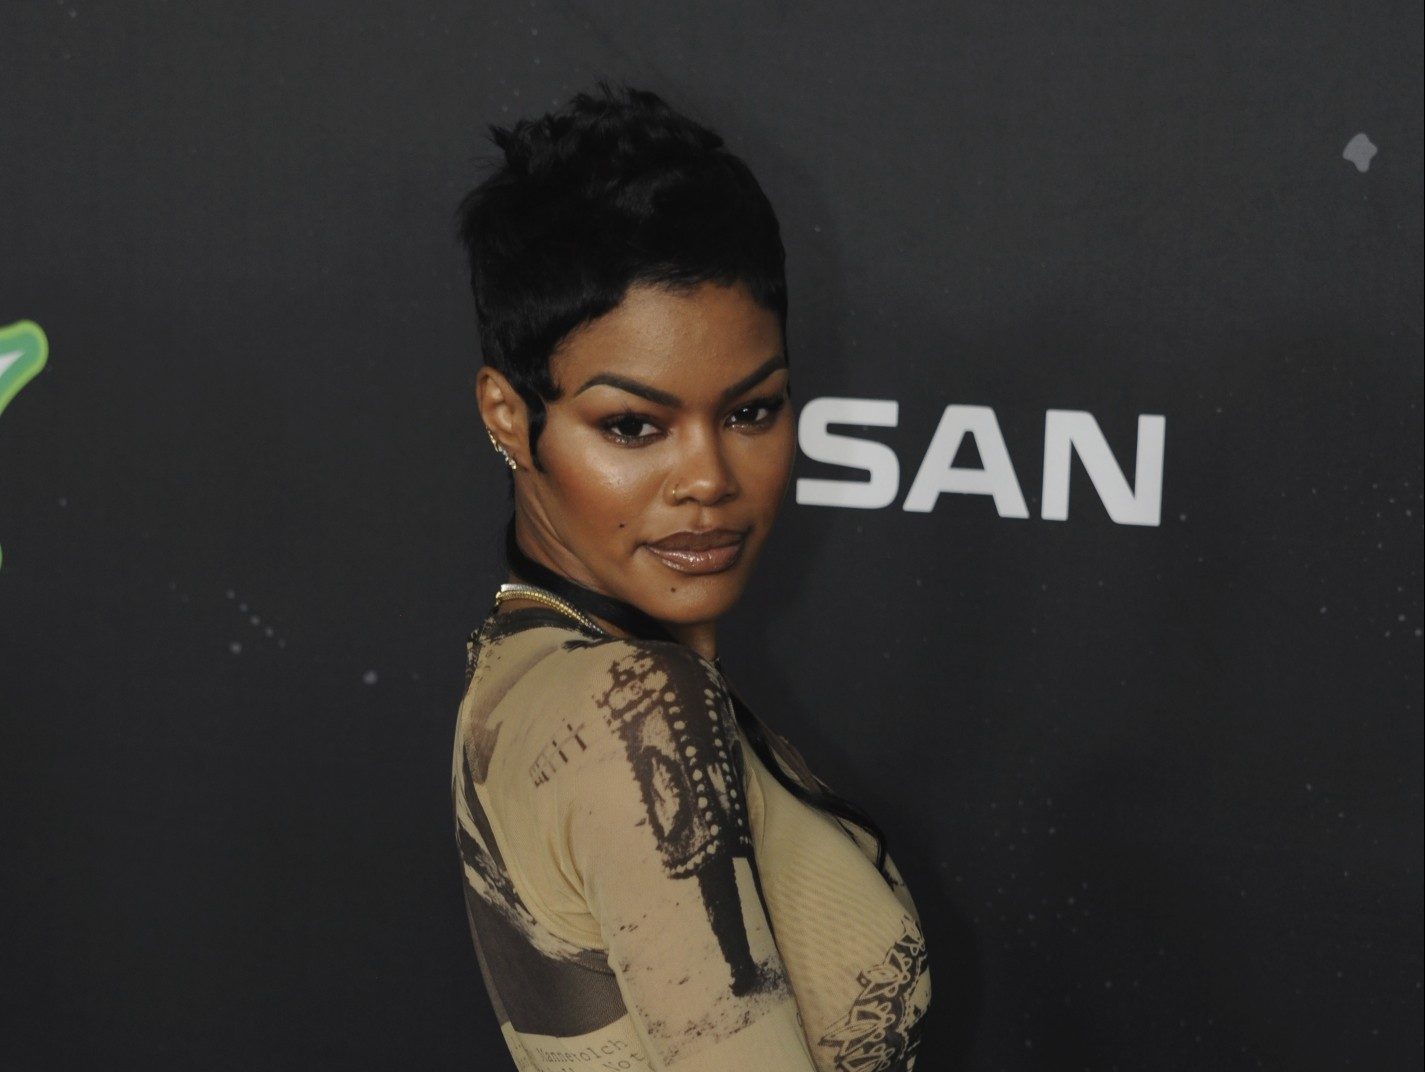 Teyana Taylor opens up about preparing to portray Dionne Warwick